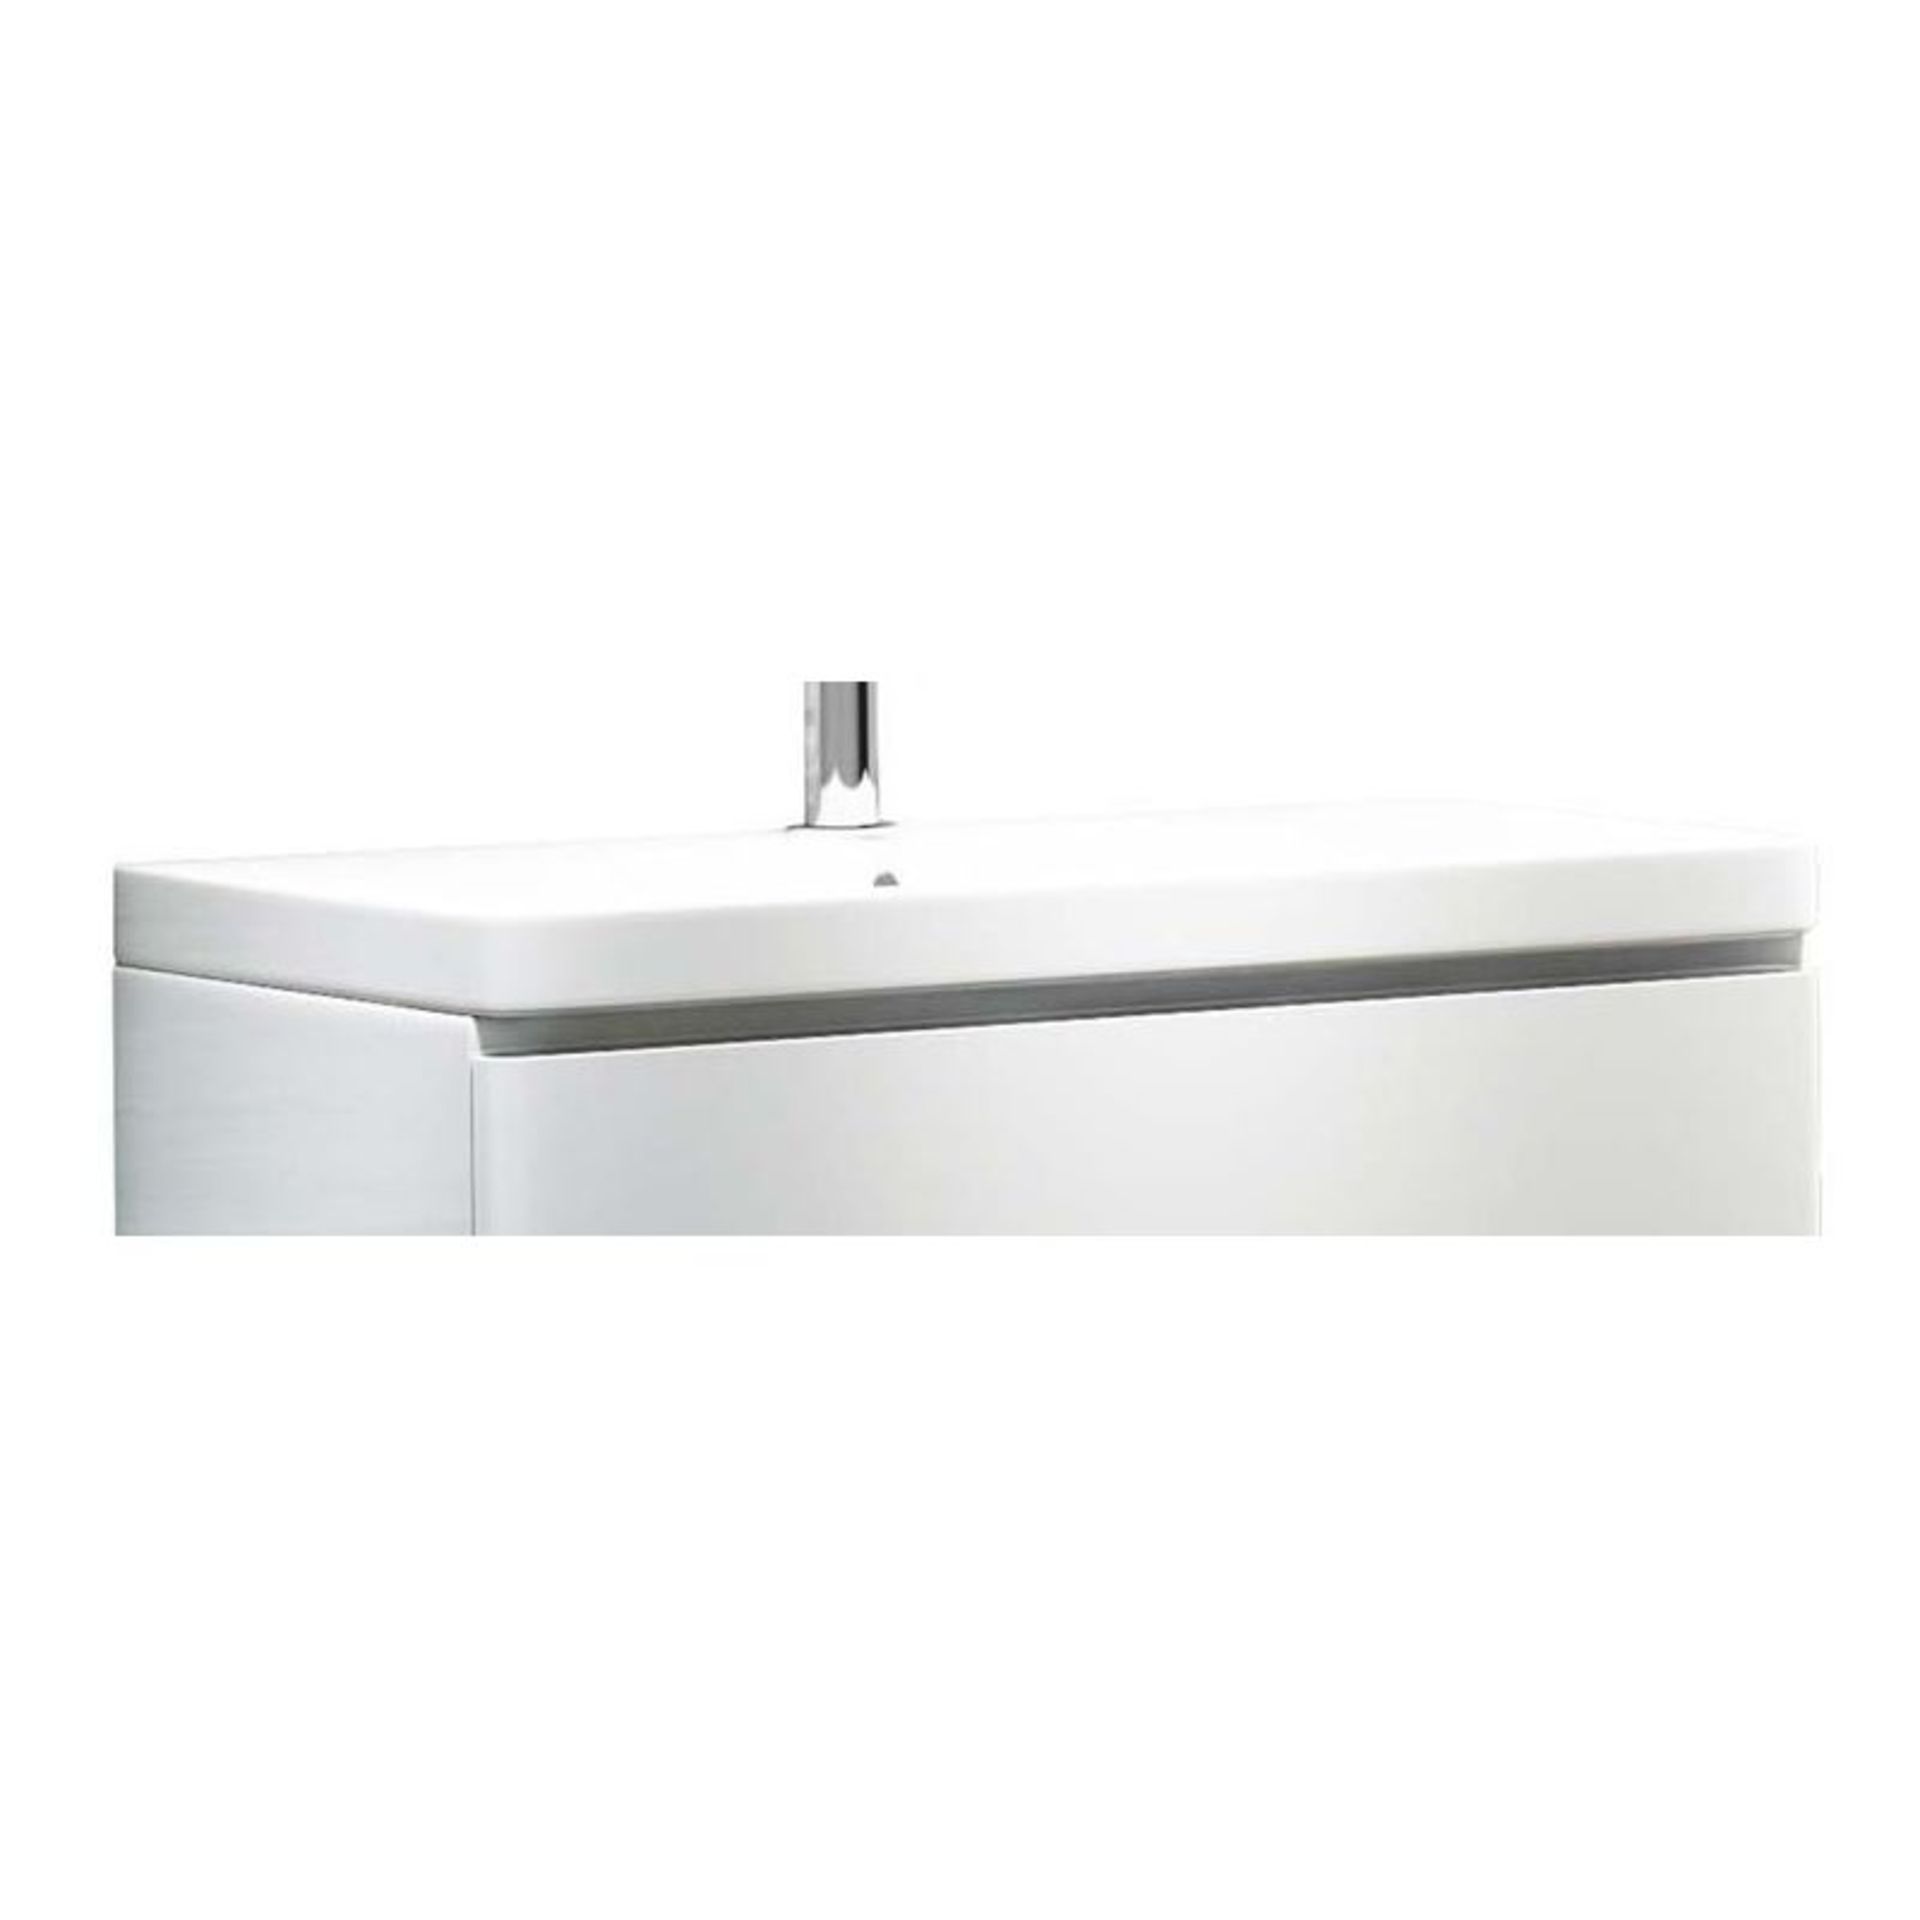 1 x Synergy Linea 800mm Wall Mounted Vanity Unit With White Ceramic 1 Tap Hole Sink Basin - RRP £795 - Image 4 of 5